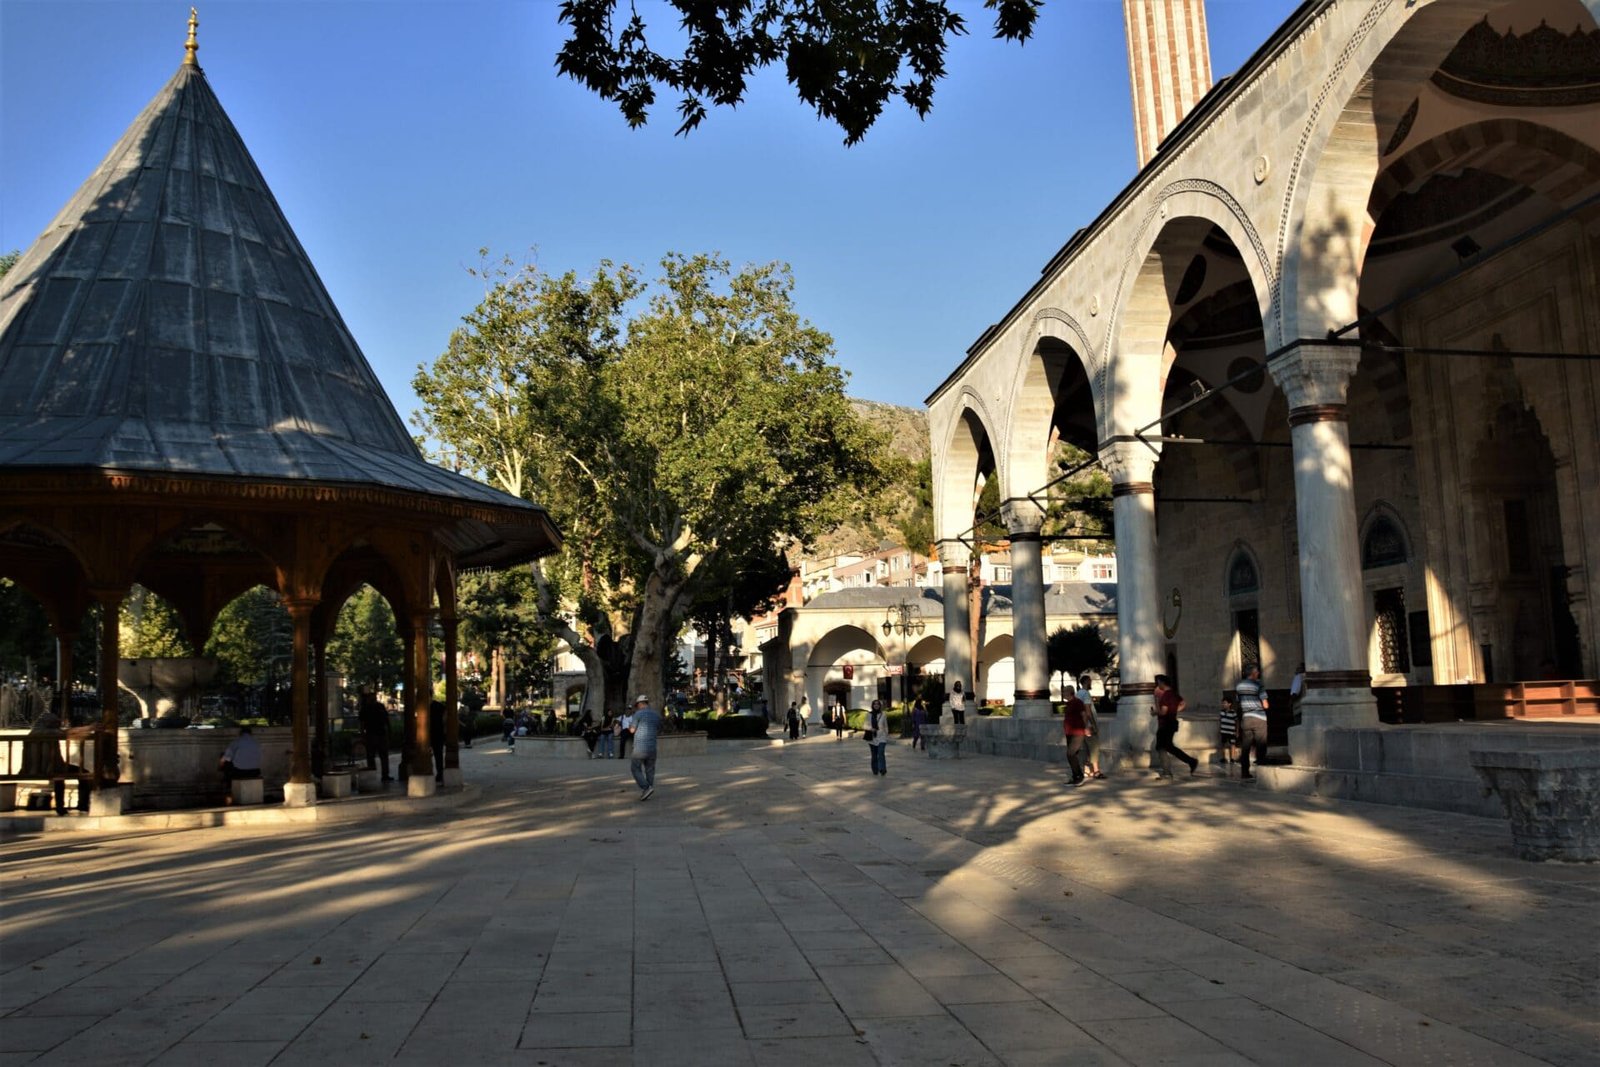 people walk across the open space between a mosque and ablution fountain covered by a wooden gazebo